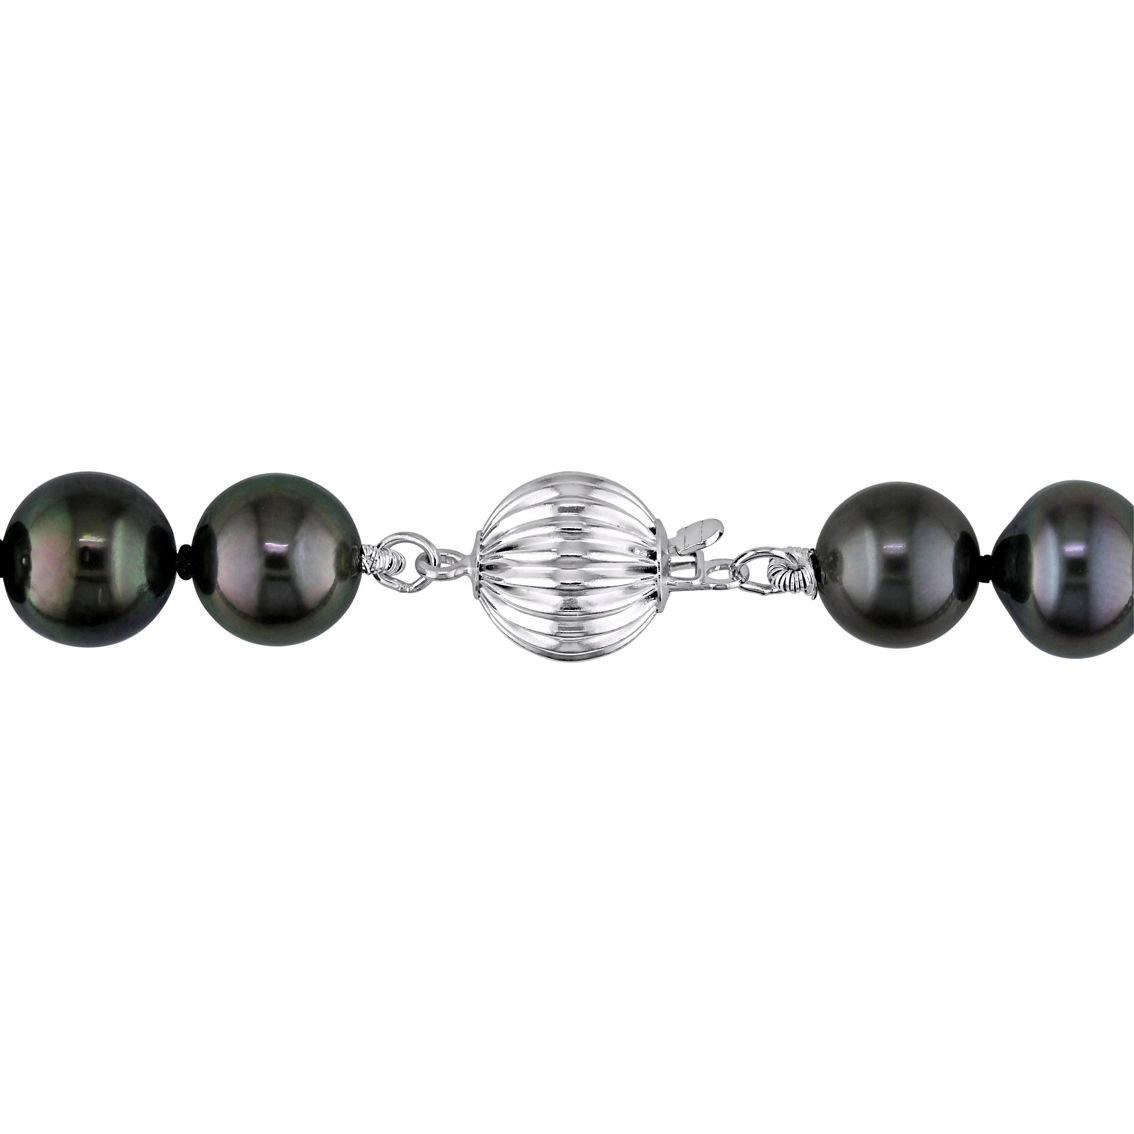 Sofia B. 14K White Gold Cultured Tahitian Pearl Strand Necklace & Studs 2 pc. Set - Image 2 of 4